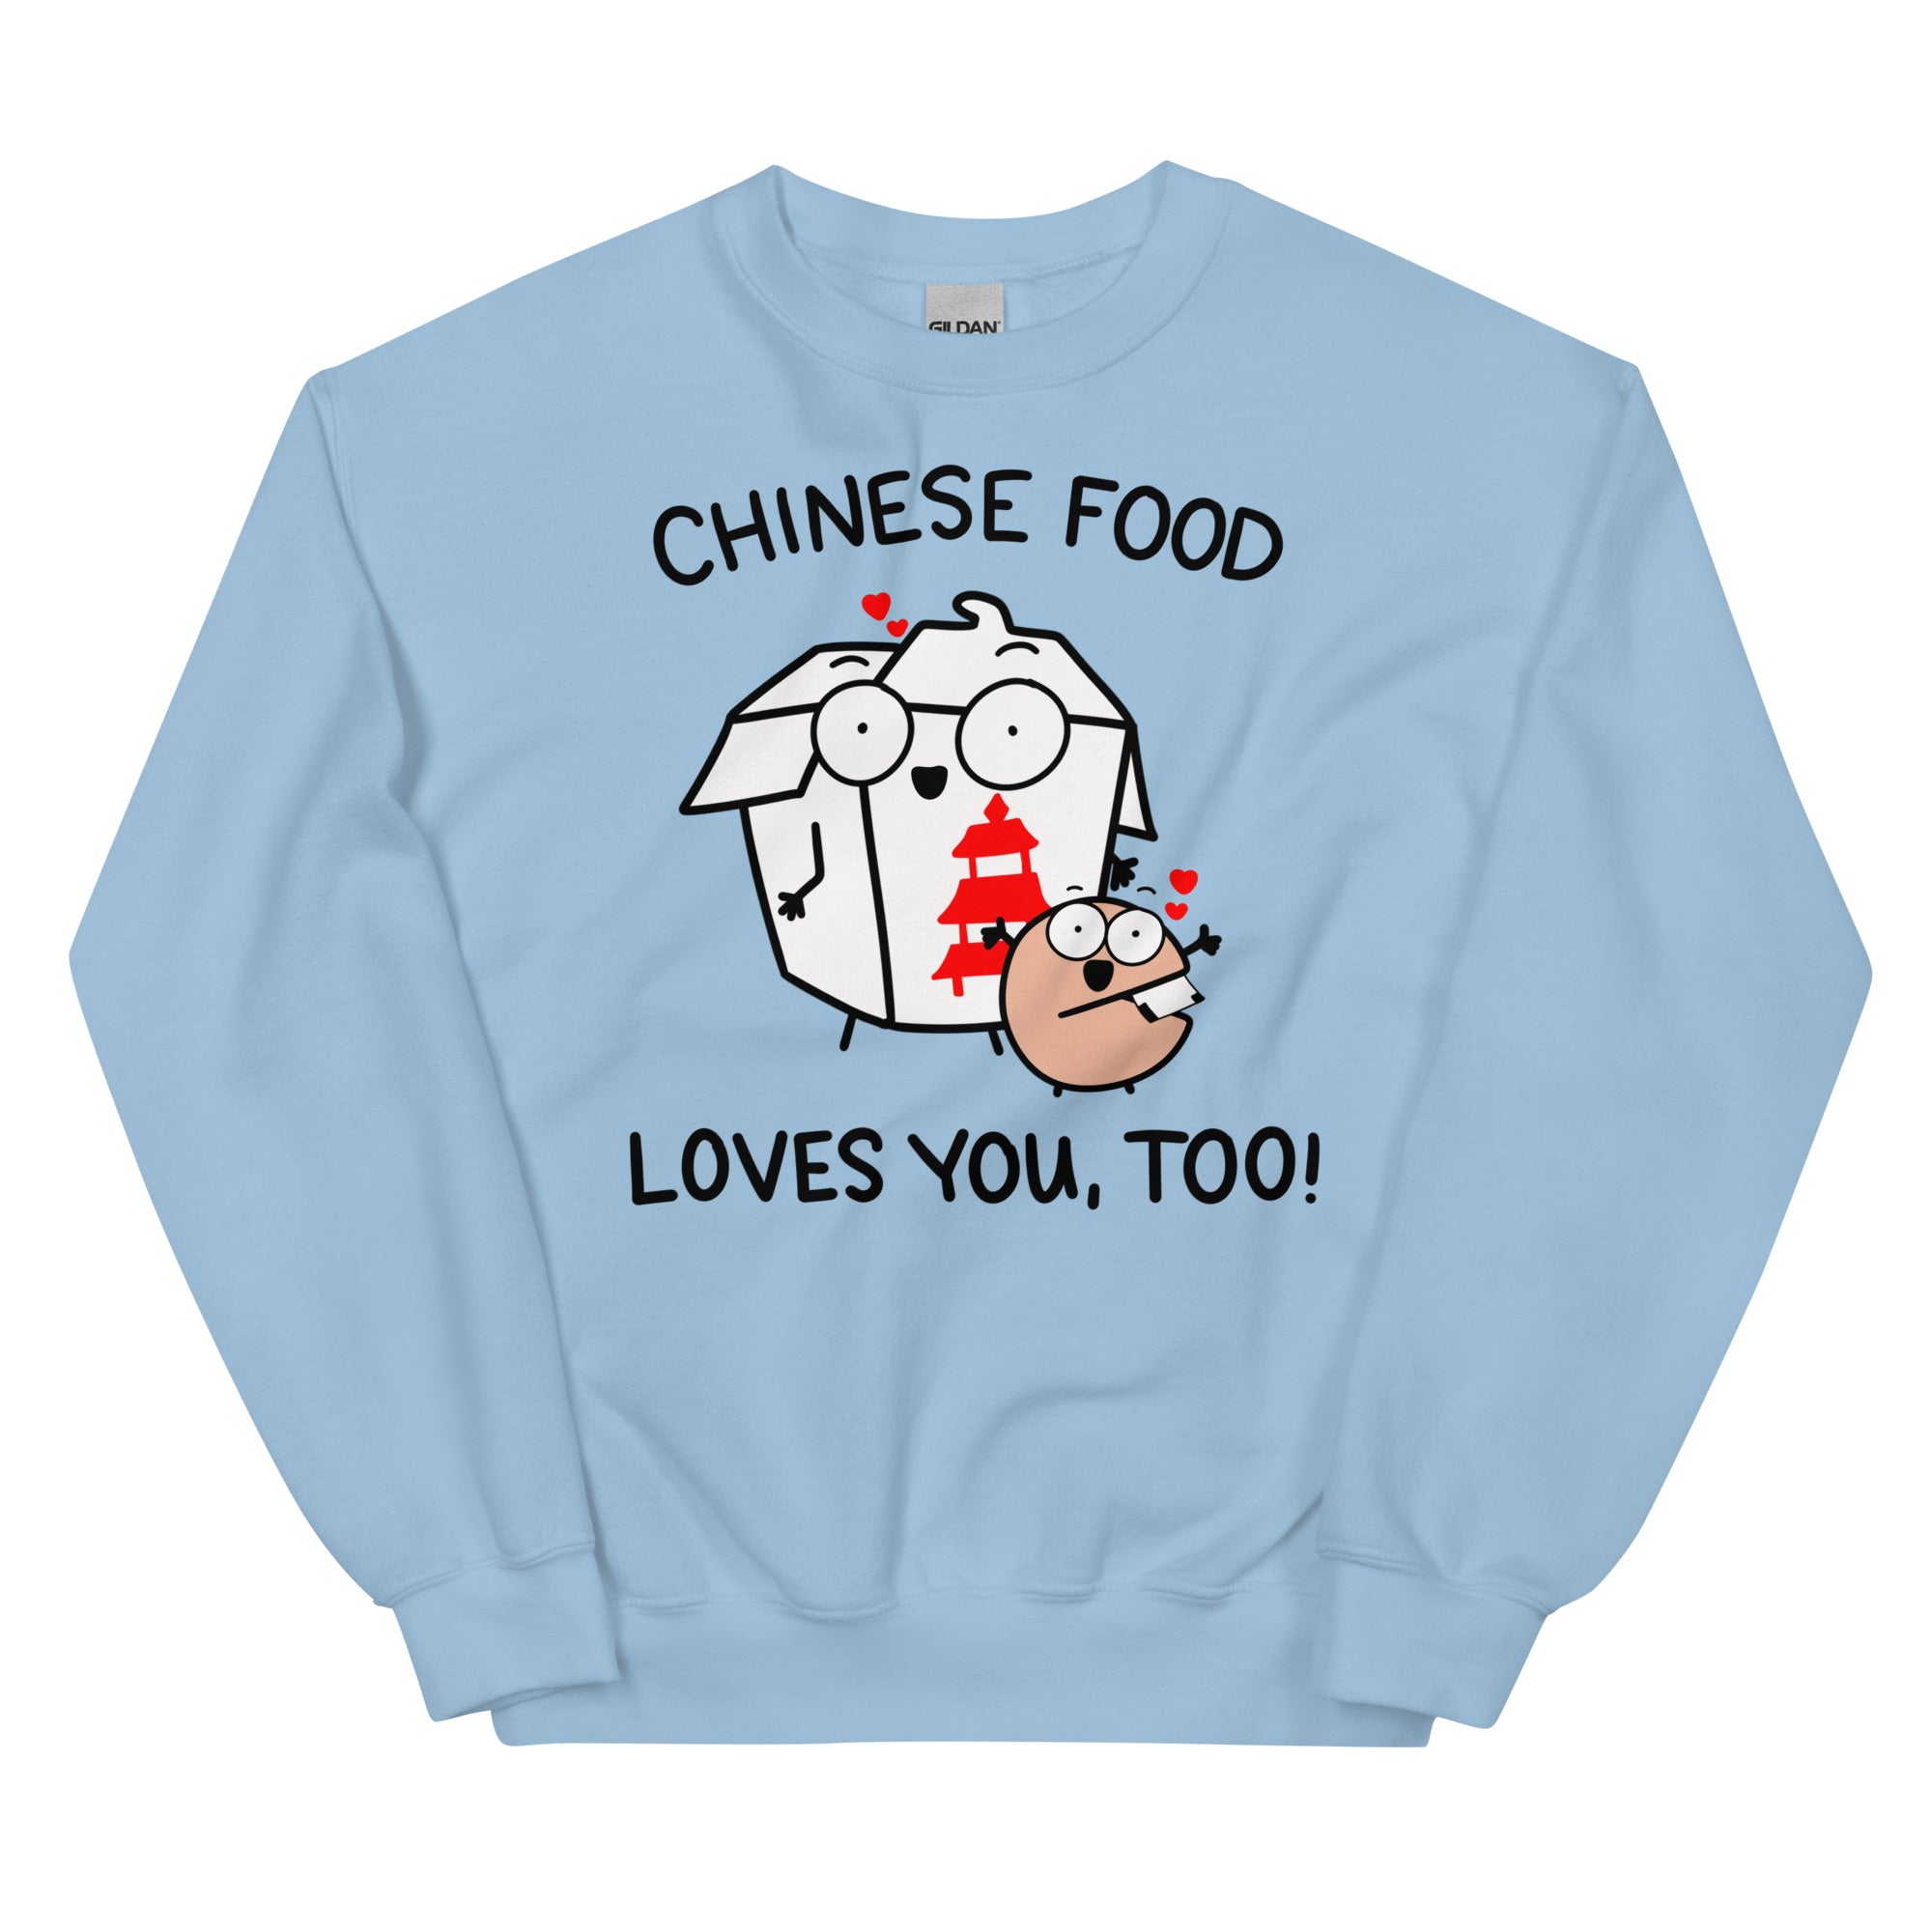 Funny Chinese food lover sweatshirt for take-out foodie shirt